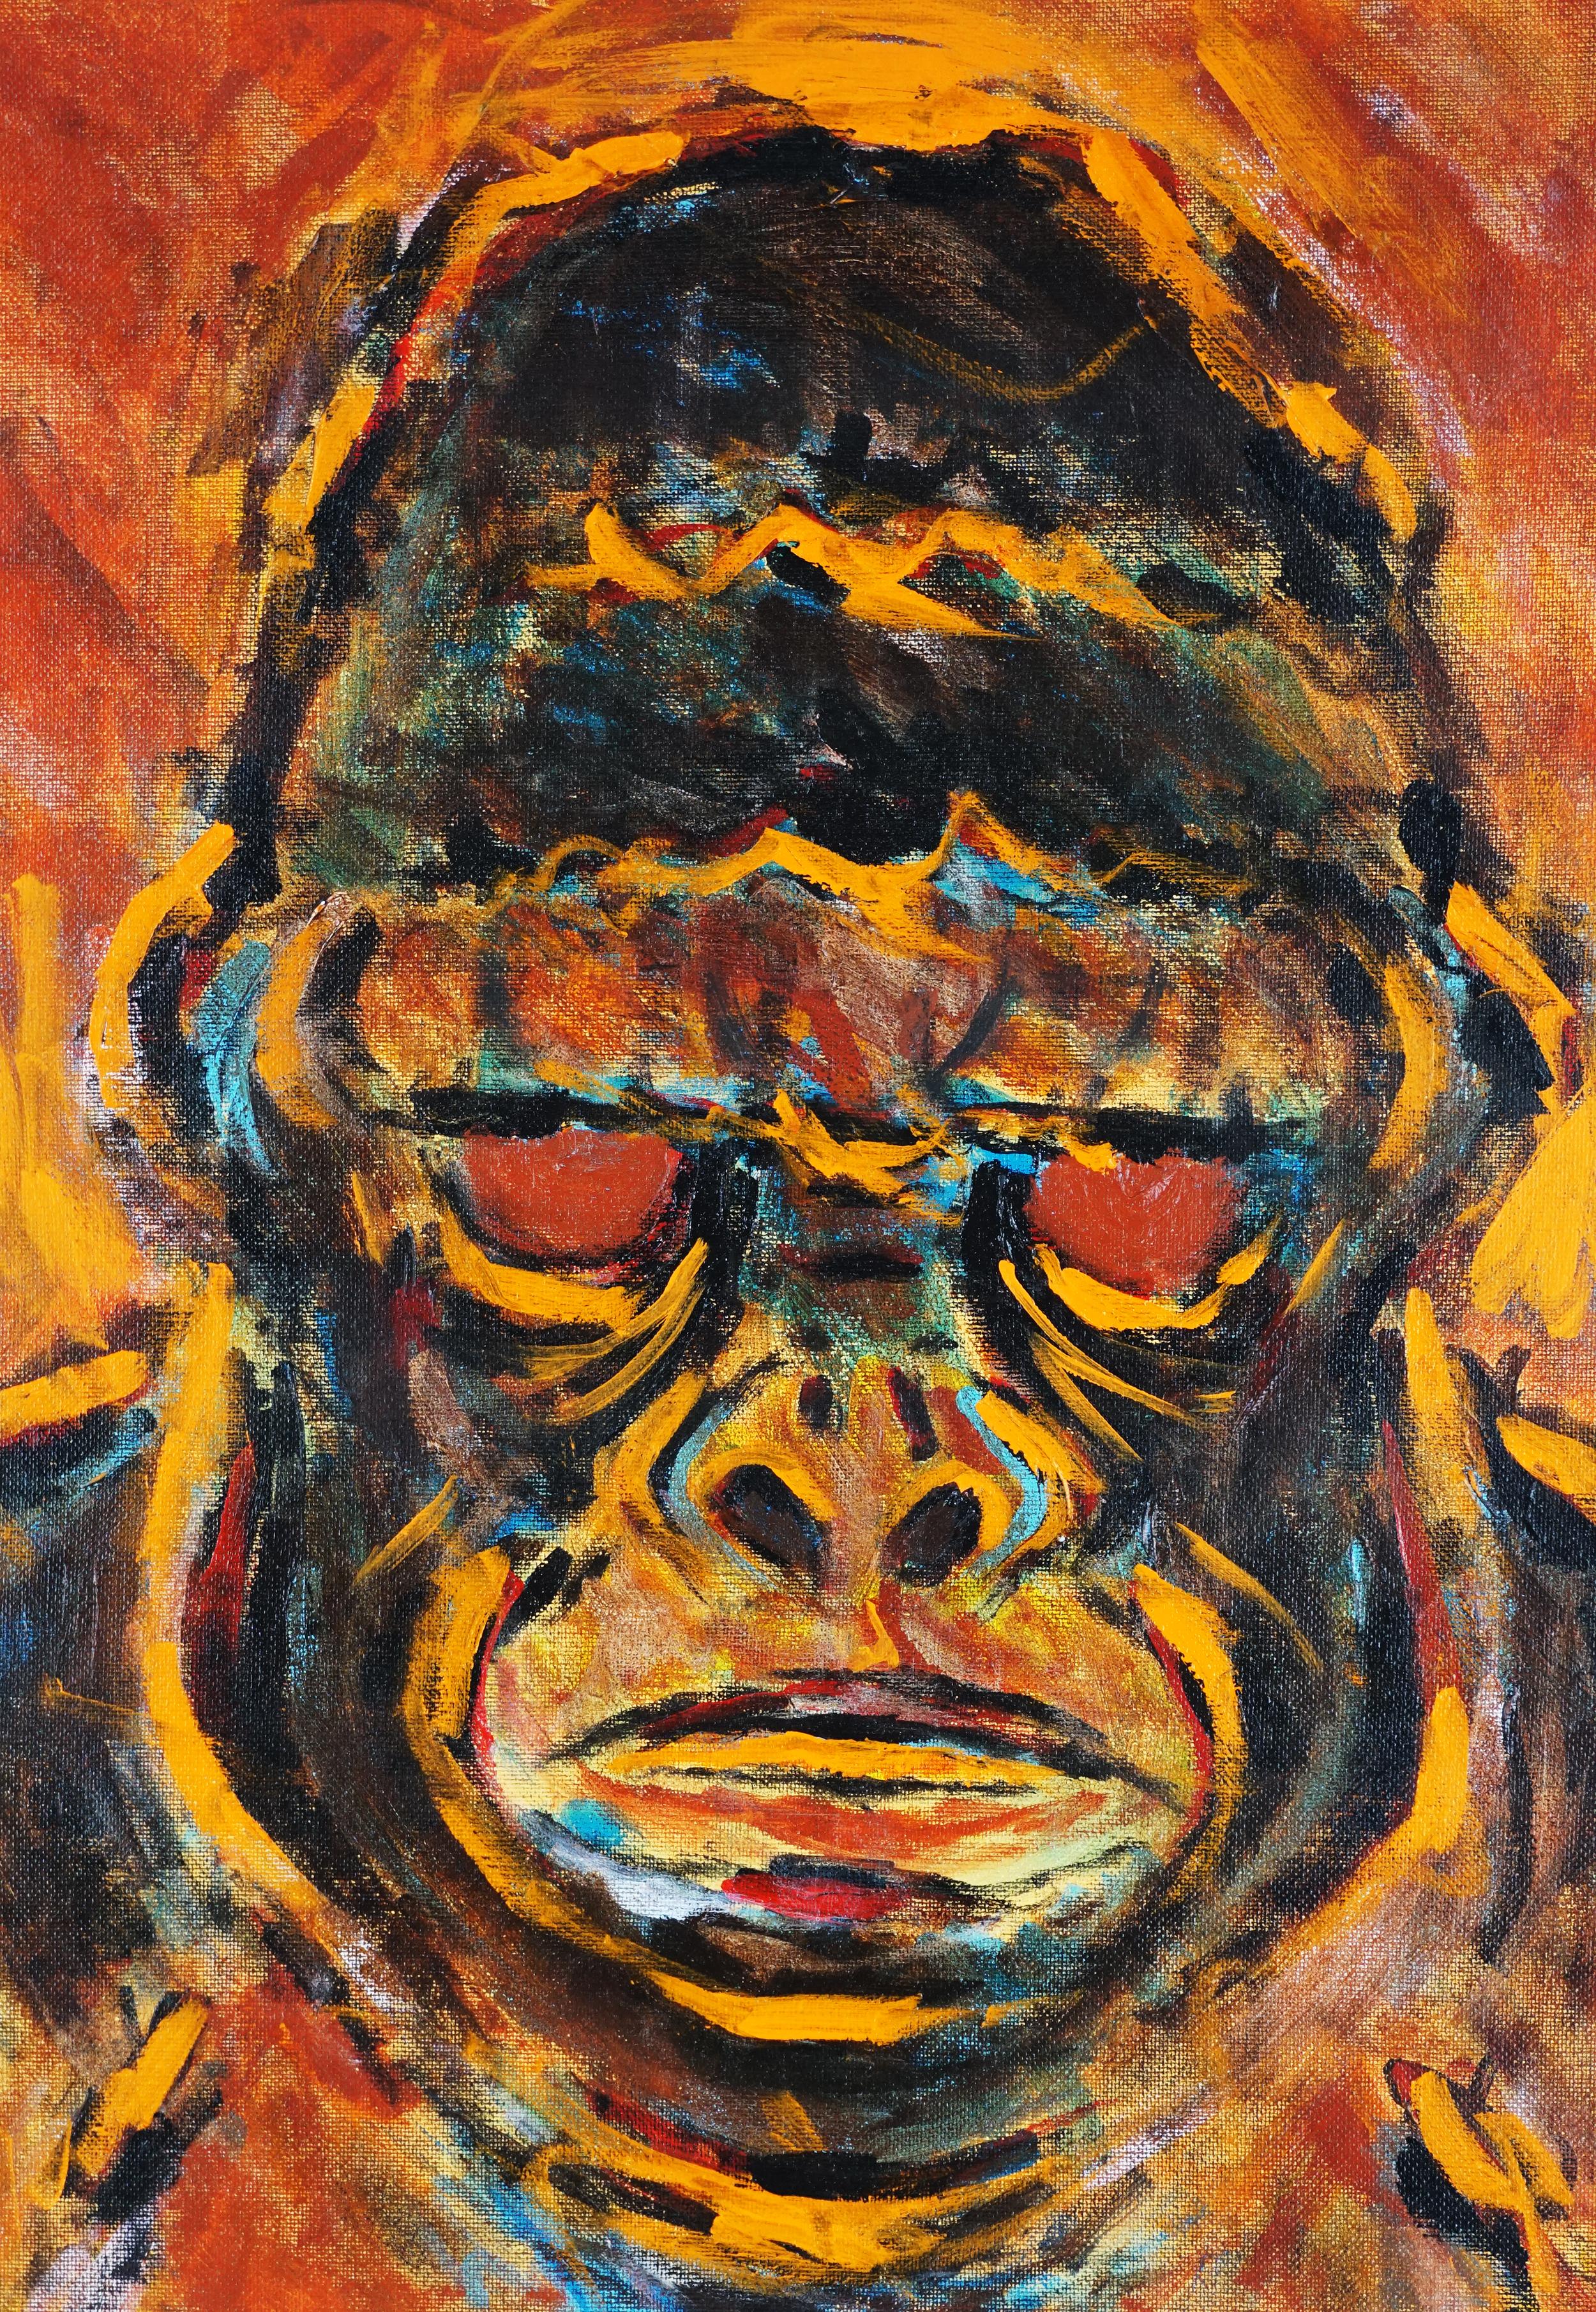 Fauvist Abstract Expressionist Lowland Gorilla - Painting by Daniel Nester